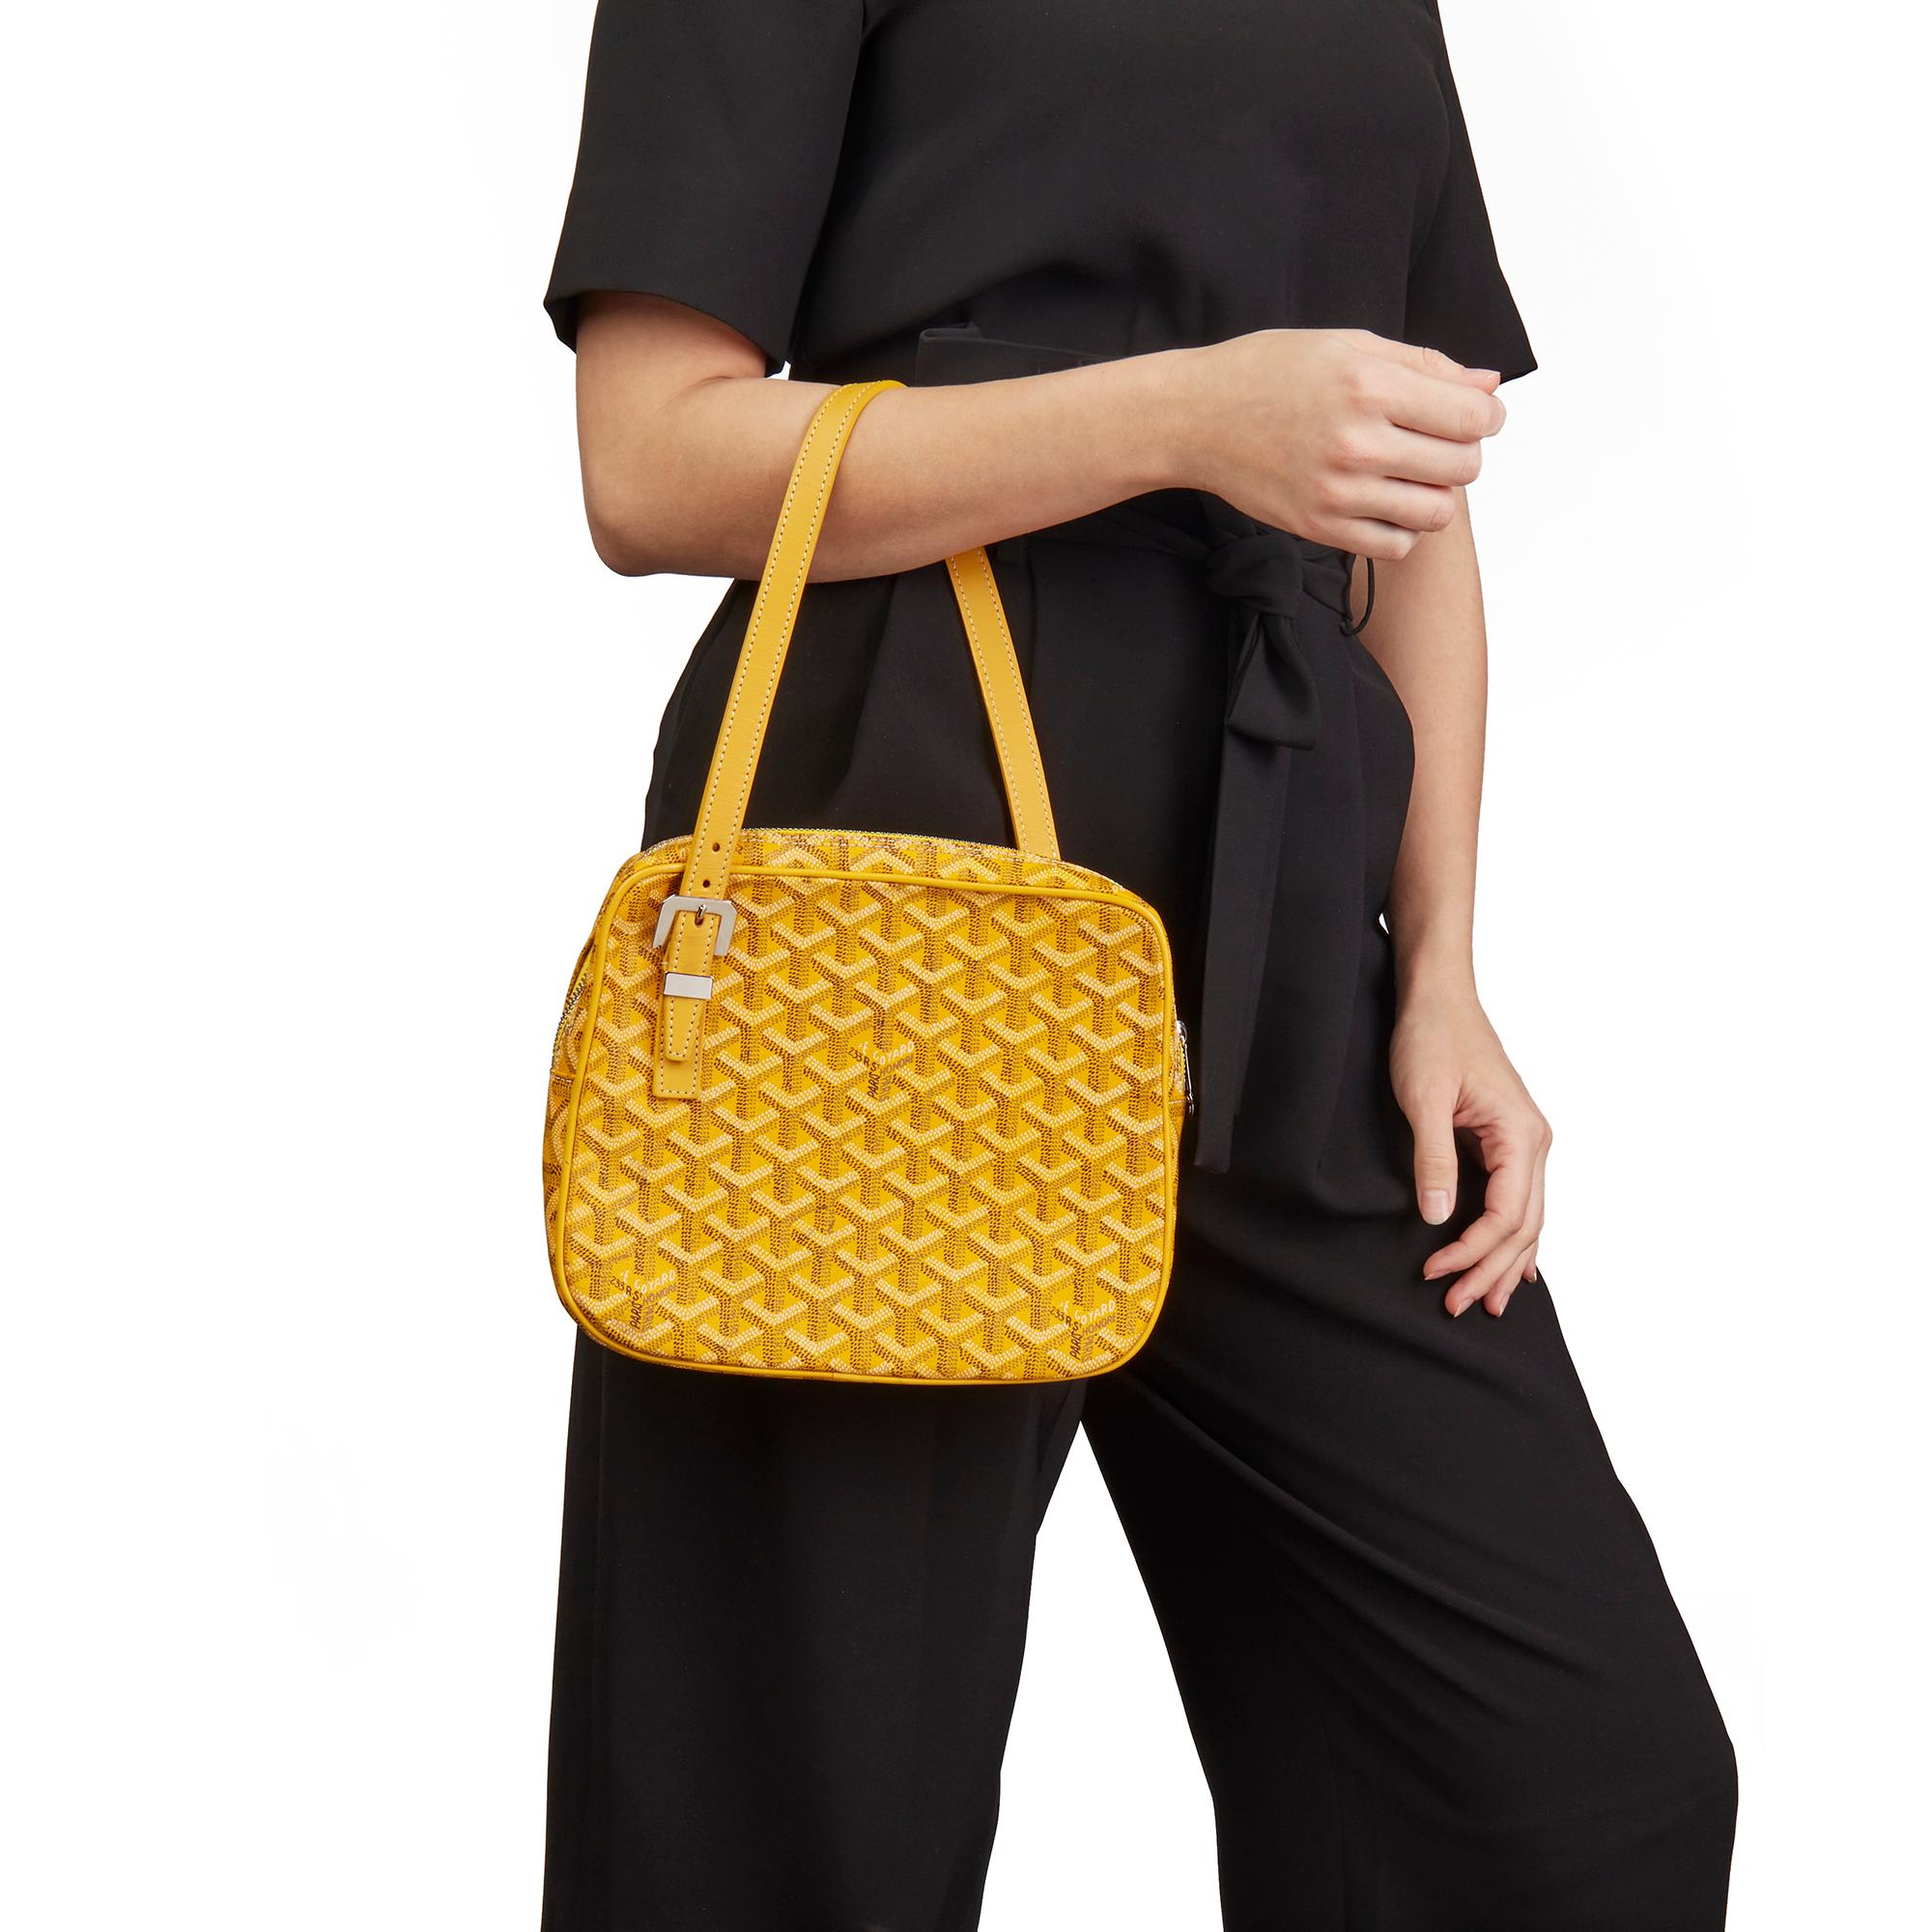 GOYARD
Yellow Chevron Monogram Canvas Yona MM

Xupes Reference: HB3156
Serial Number: MAE 020078
Age (Circa): 2008
Authenticity Details: Serial Stamp (Made in France)
Gender: Ladies
Type: Top Handle, Shoulder

Colour: Yellow
Hardware: